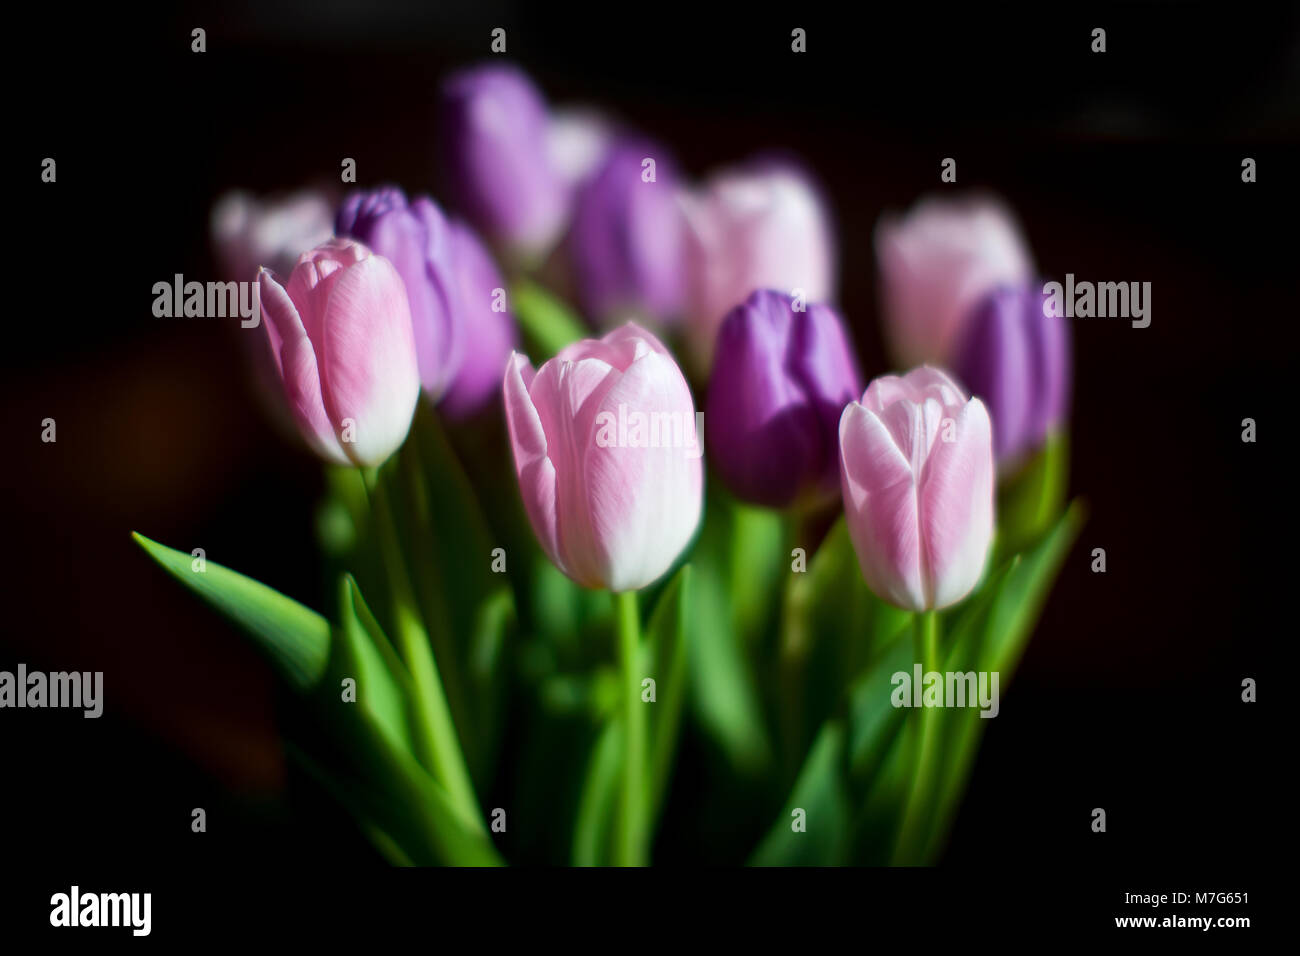 An arrangement of pink and purple tulips set against a black background. Stock Photo